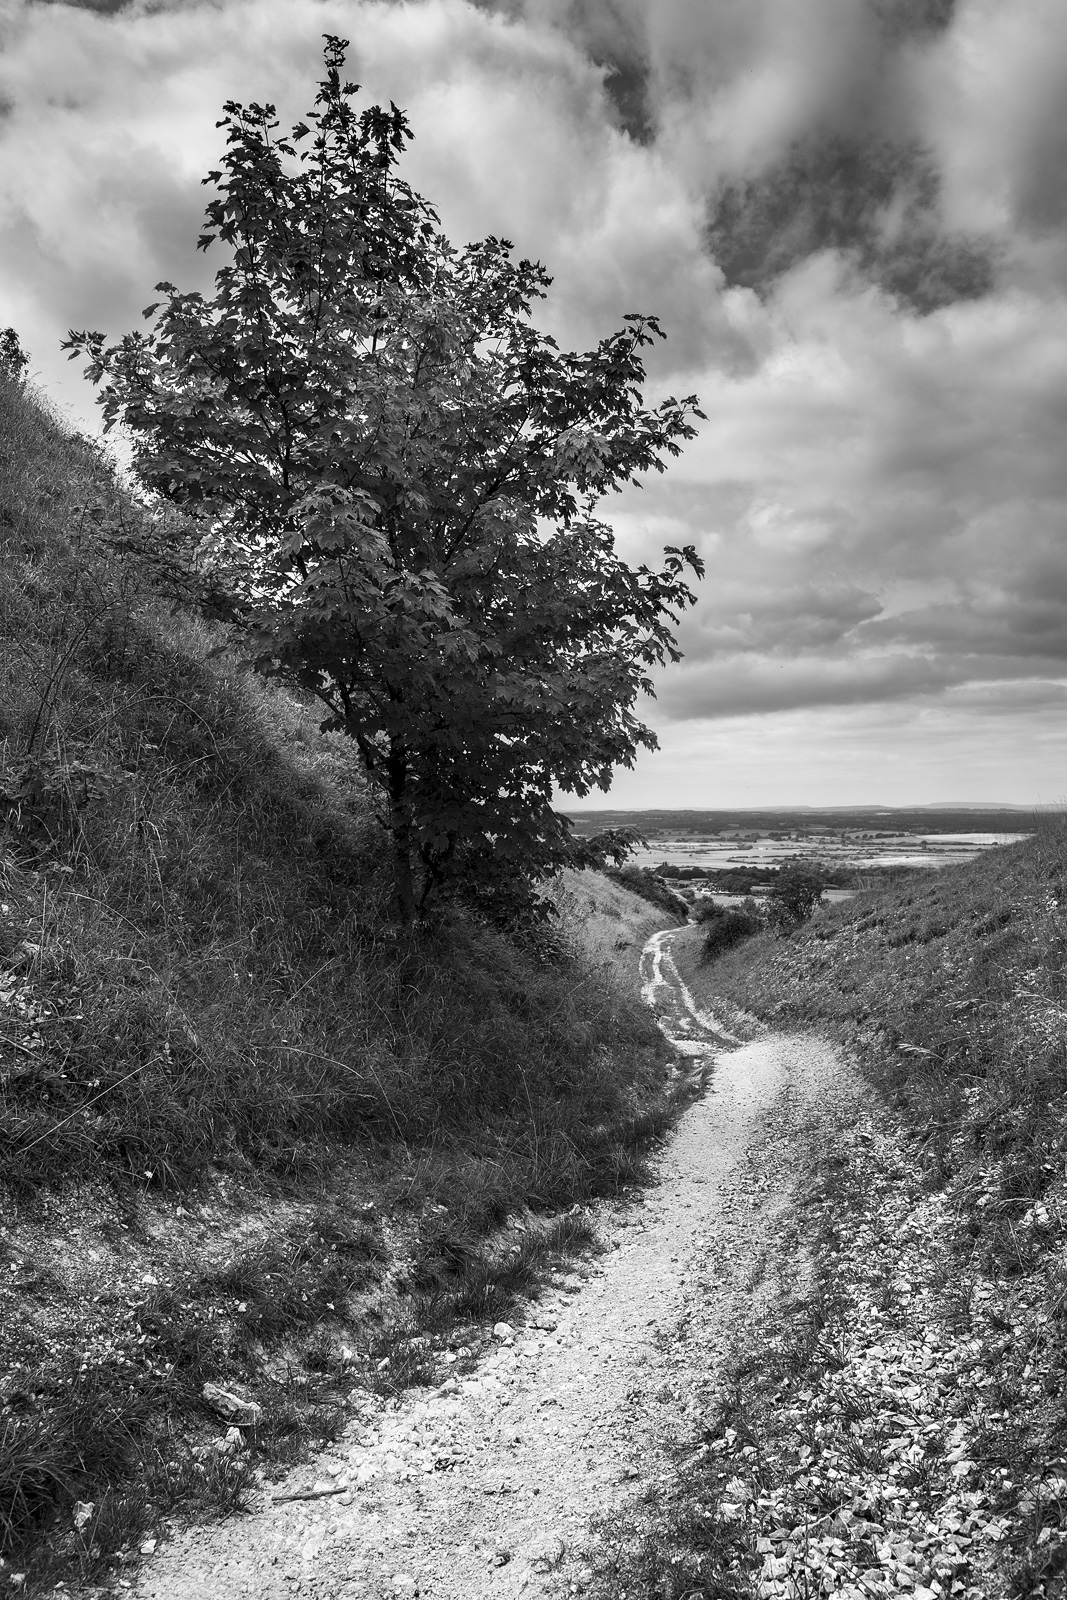 Chalk path with backed sides leading down hill with cloudy sky, tree and view west over s